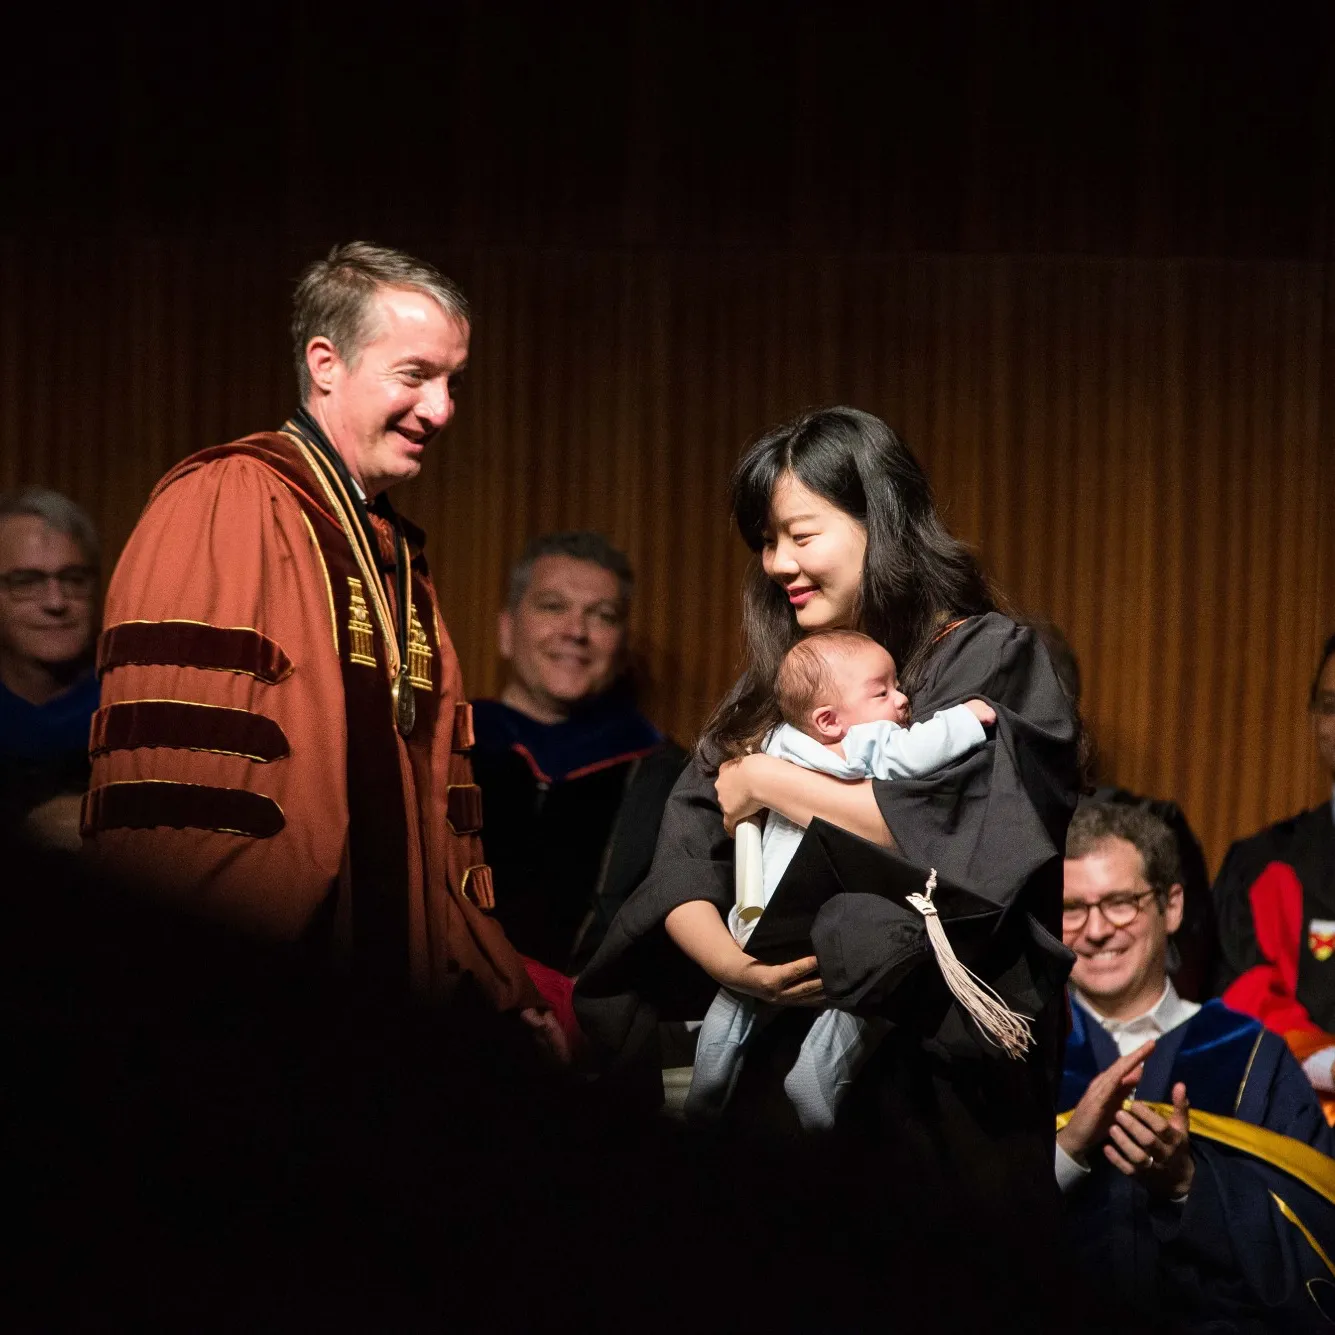 International Business School Celebrates Diversity and Family Values During Commencement